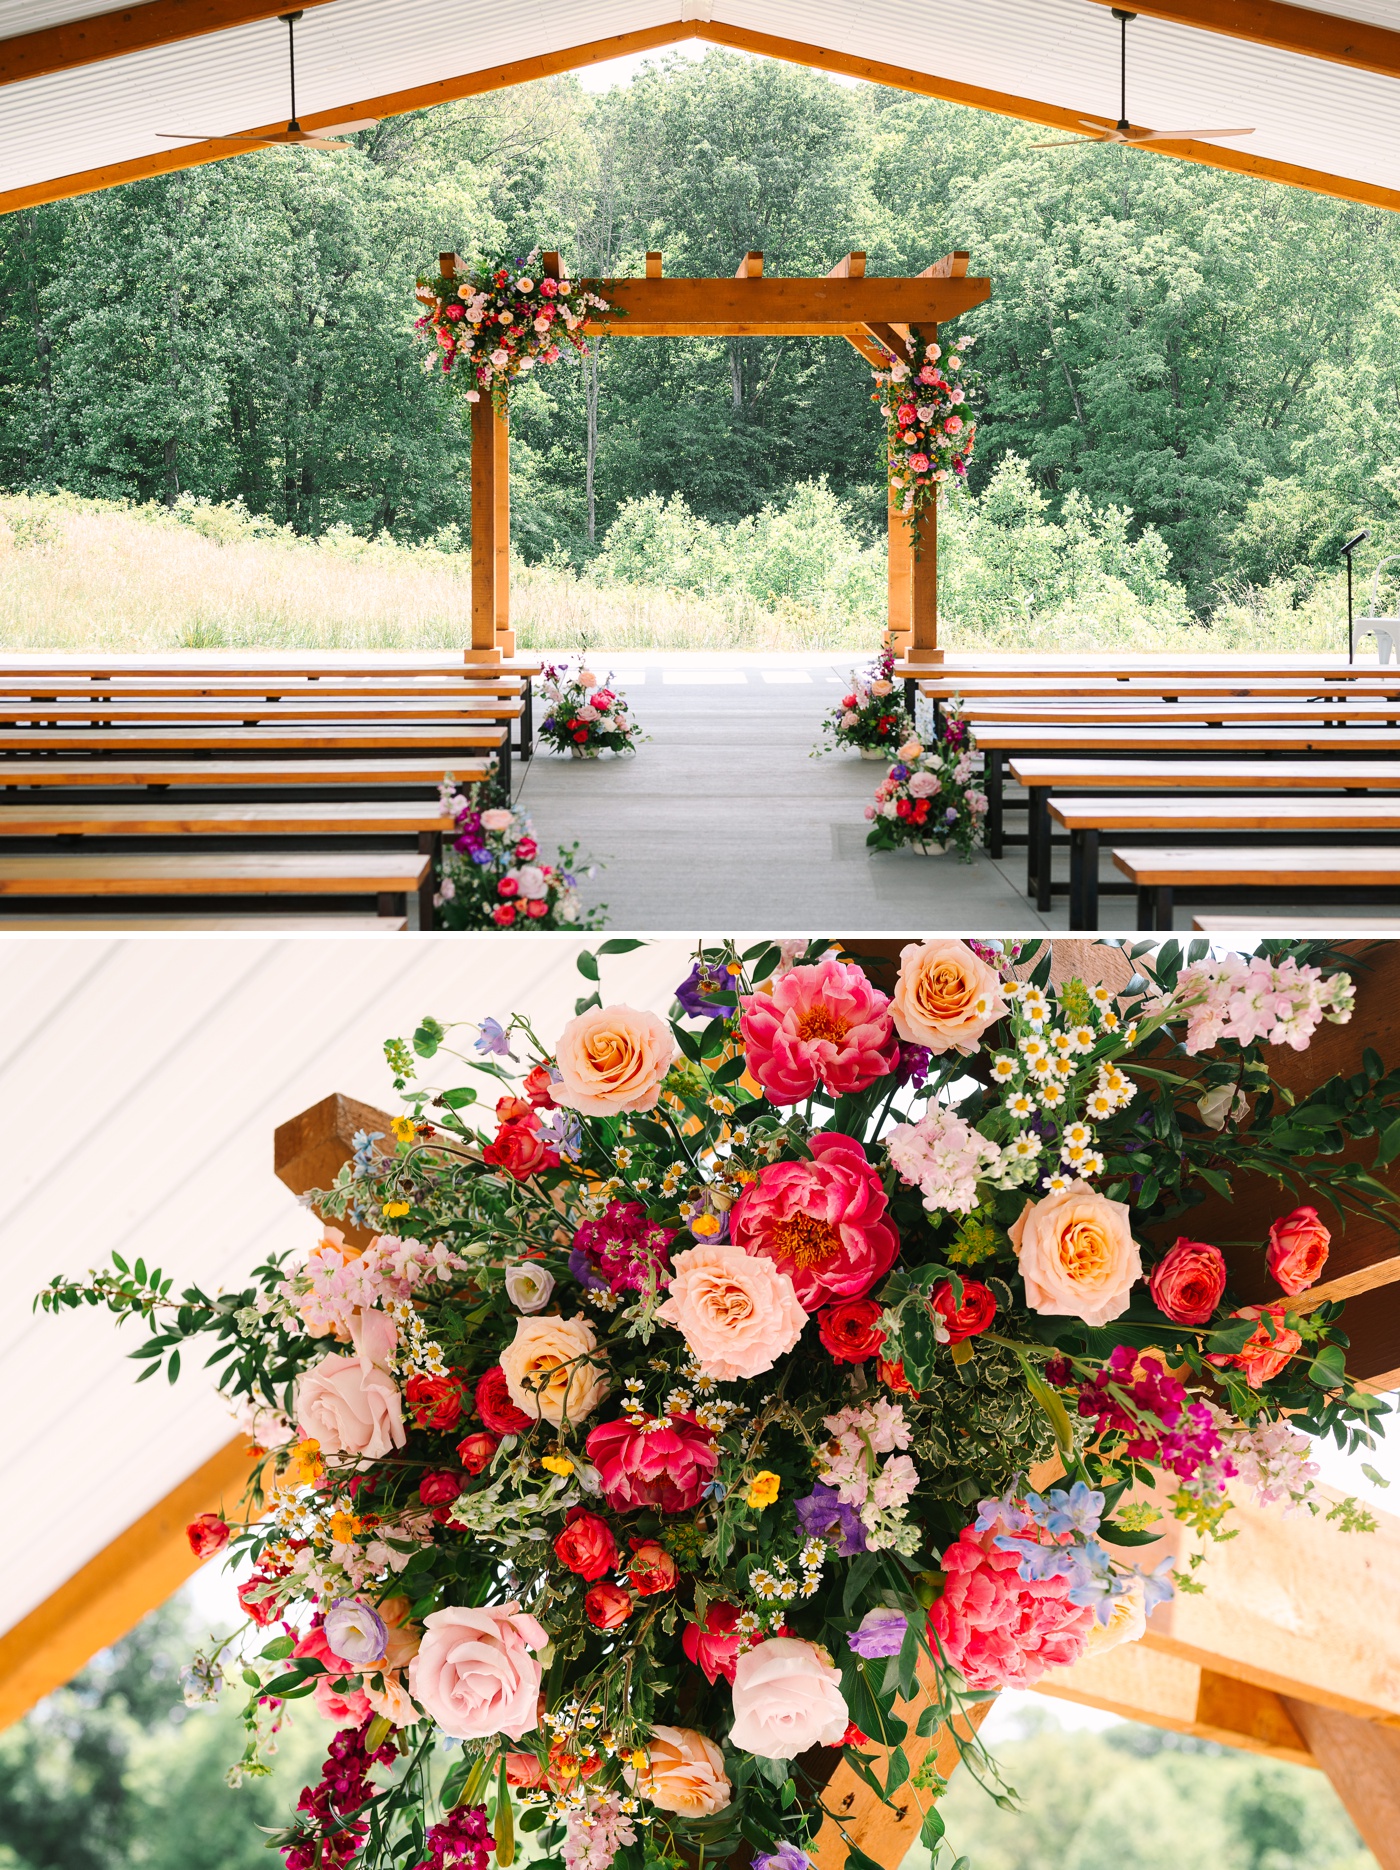 Colorful floral wedding arch with roses, peonies, and feverfew daisies by For the Beauty Floral